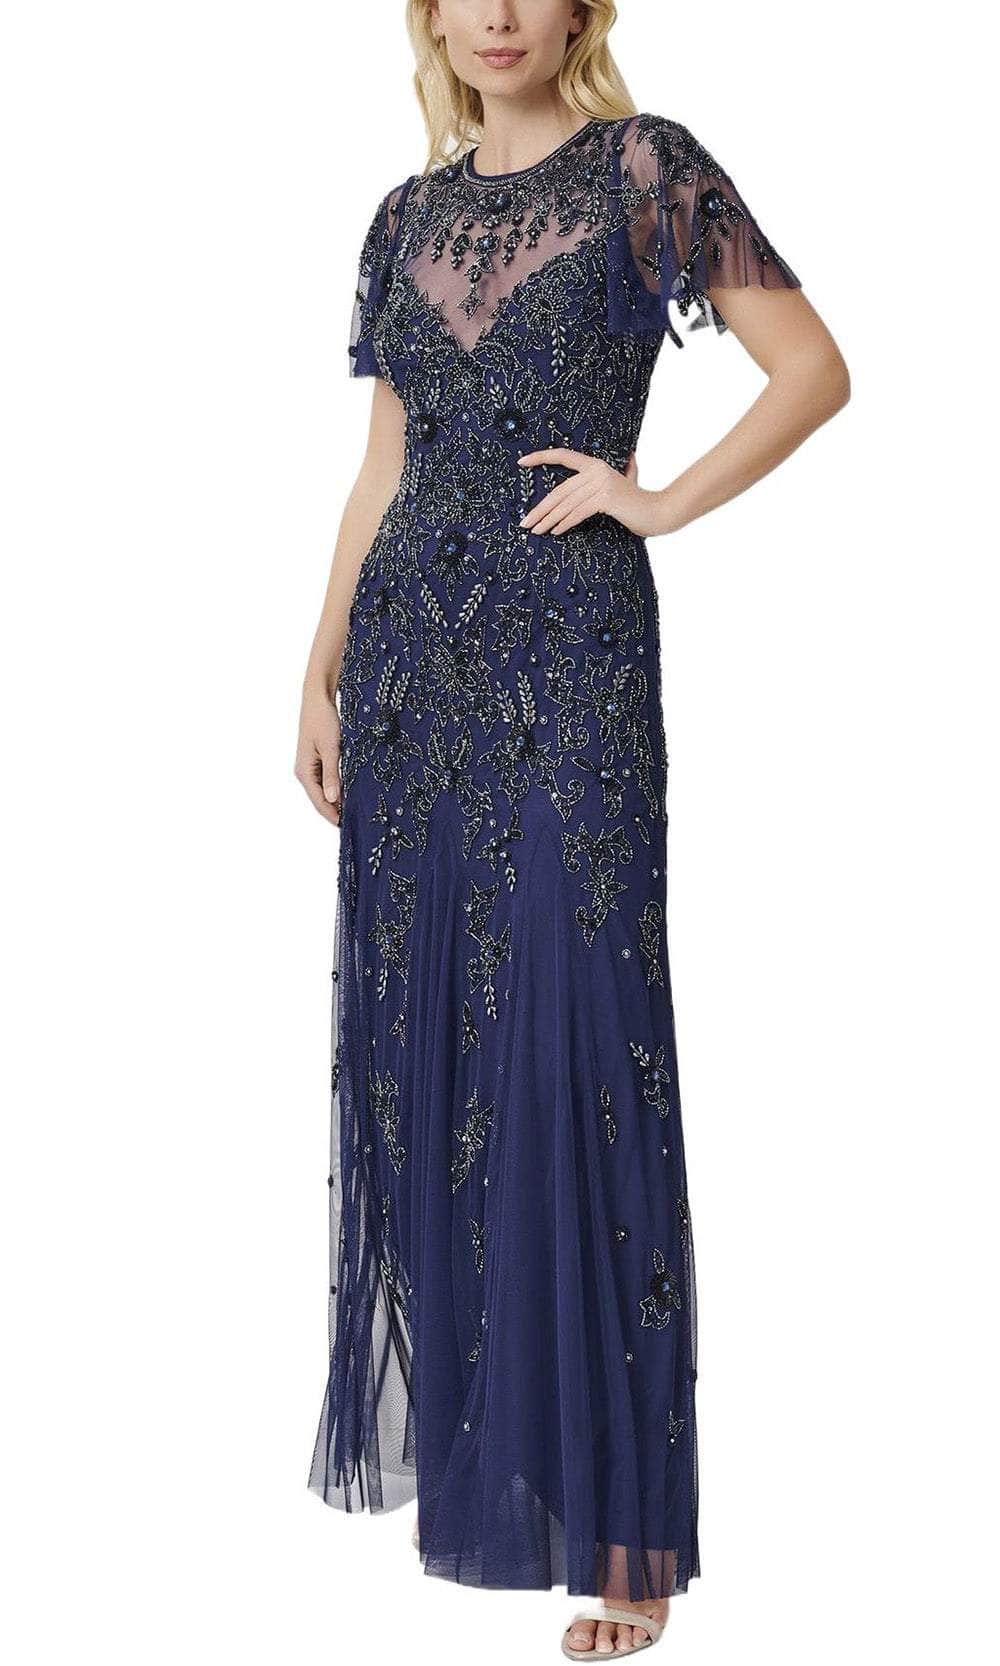 Image of Aidan Mattox MD1E207347 - Beaded Illusion Neckline Embellished Gown